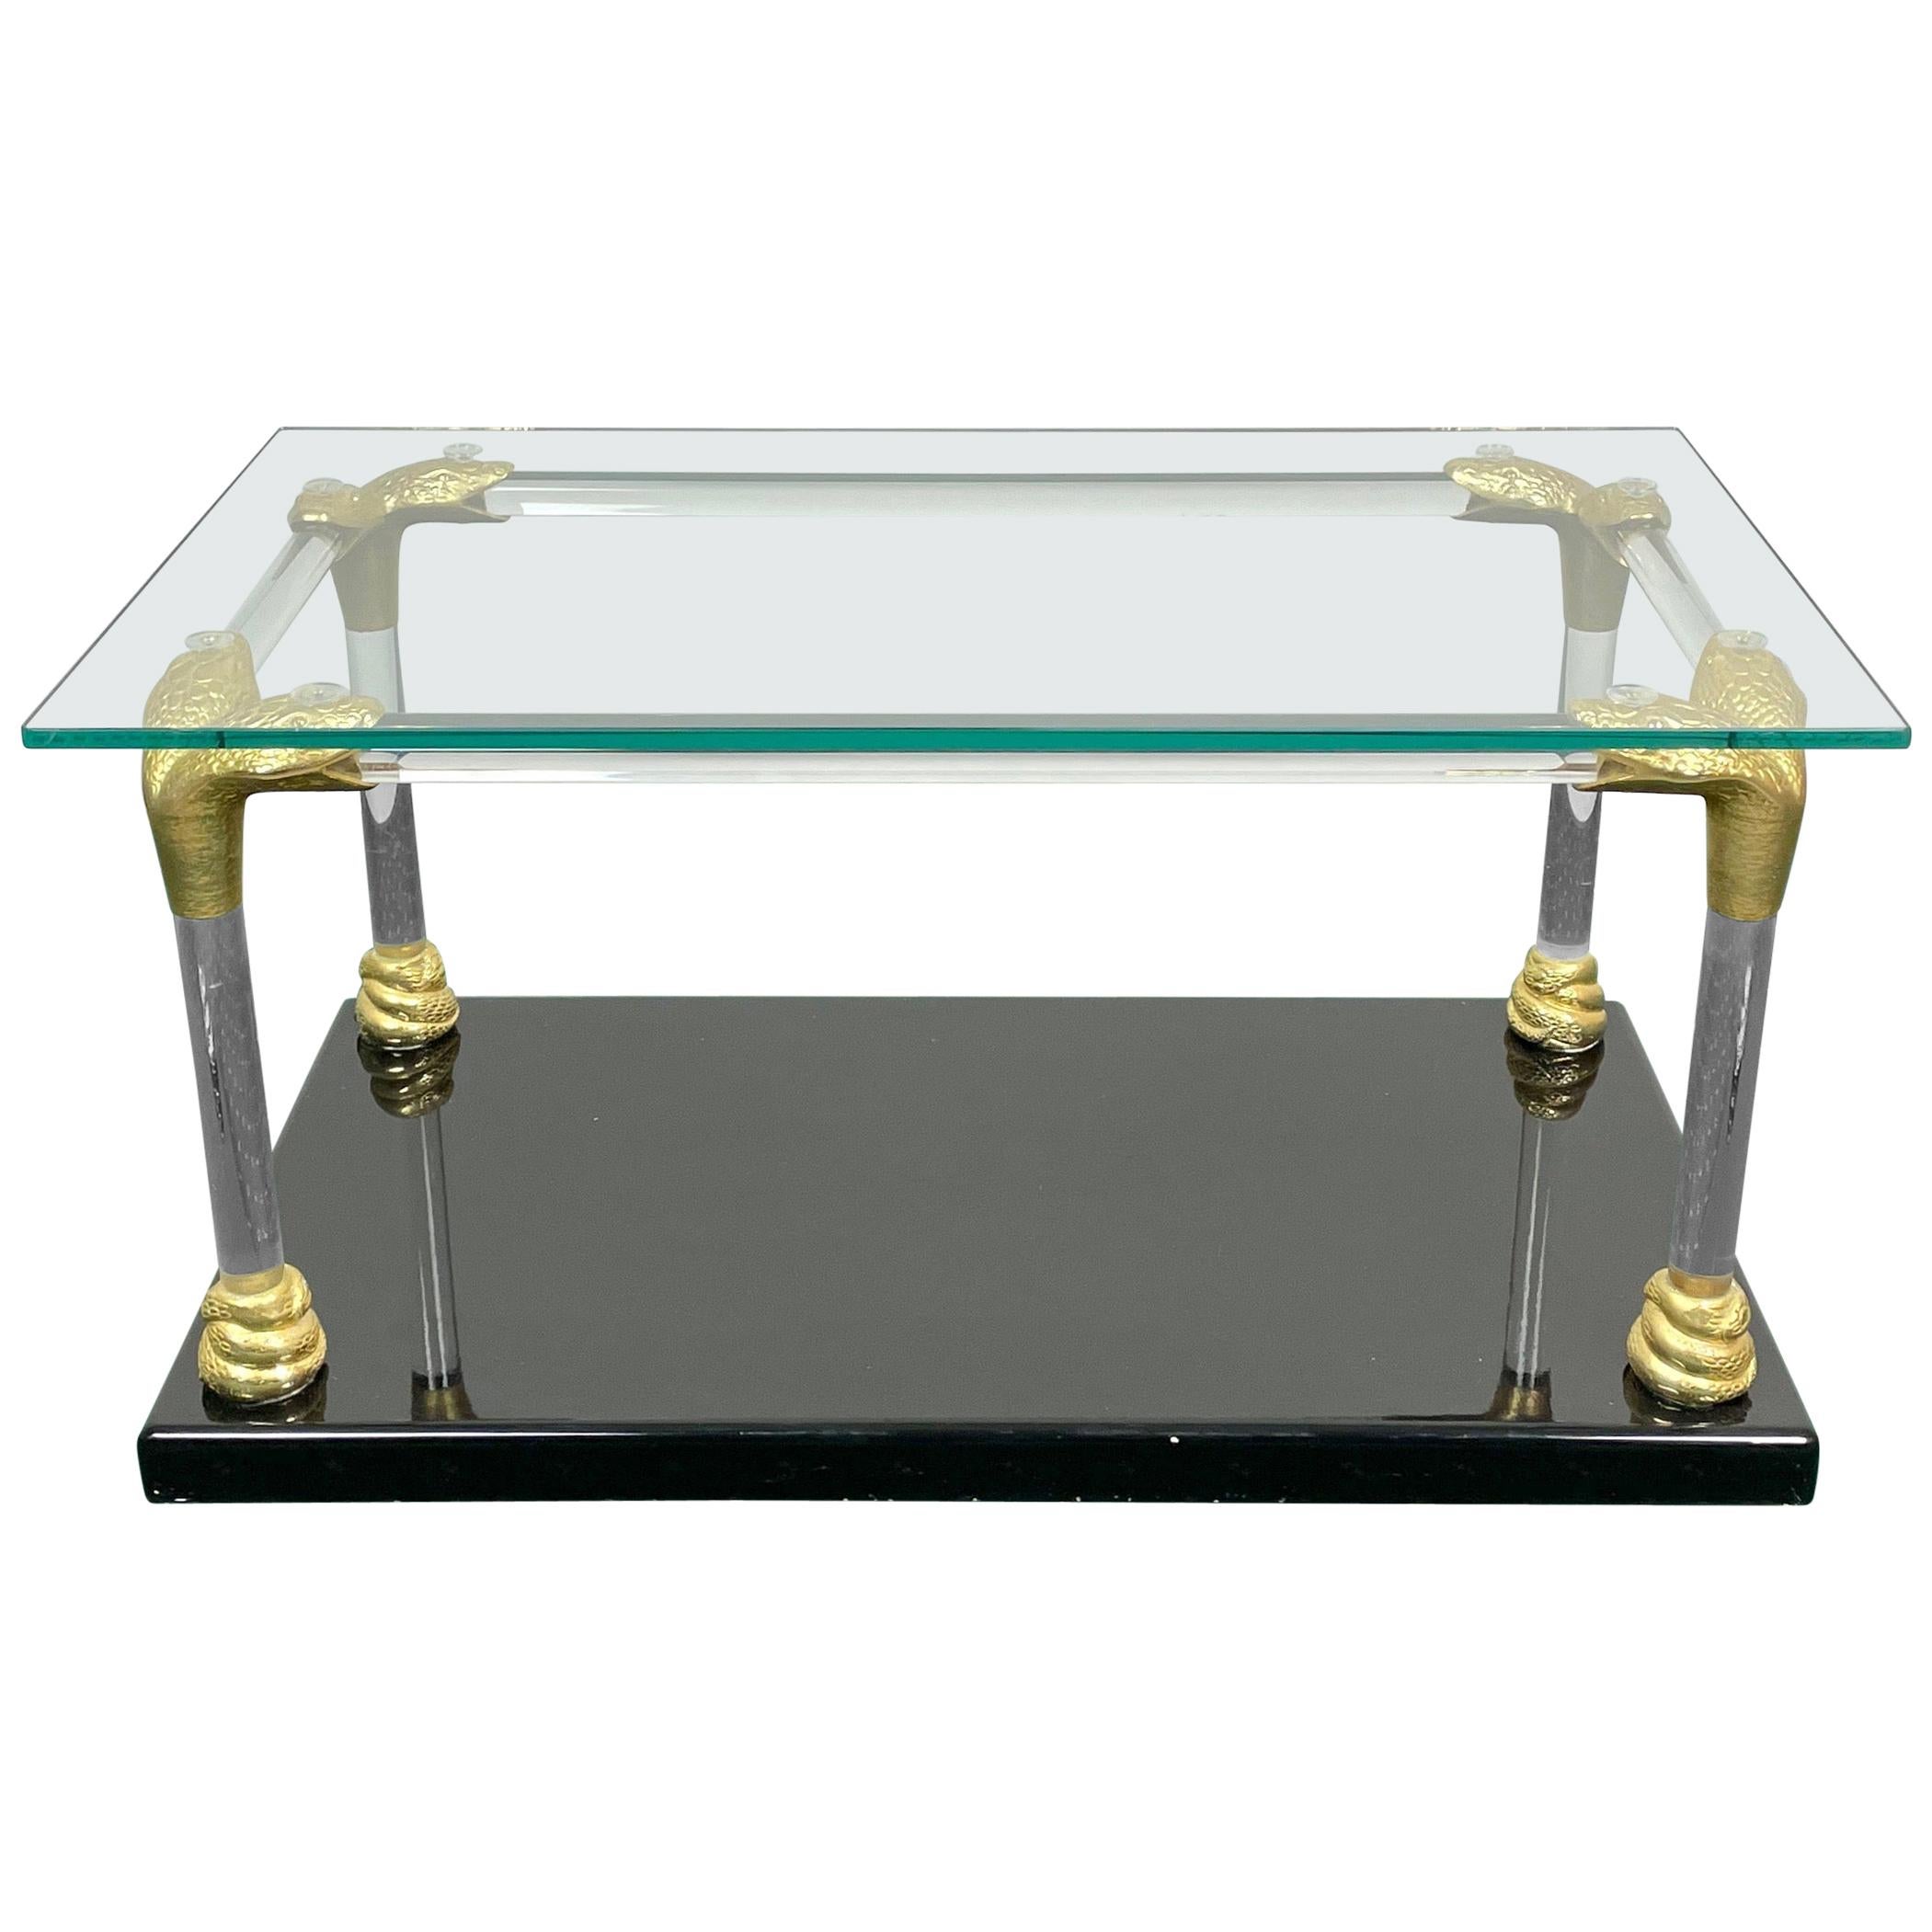 Lucite, Wood and Brass Coffee Table with Snake Head Details, Italy, 1970s